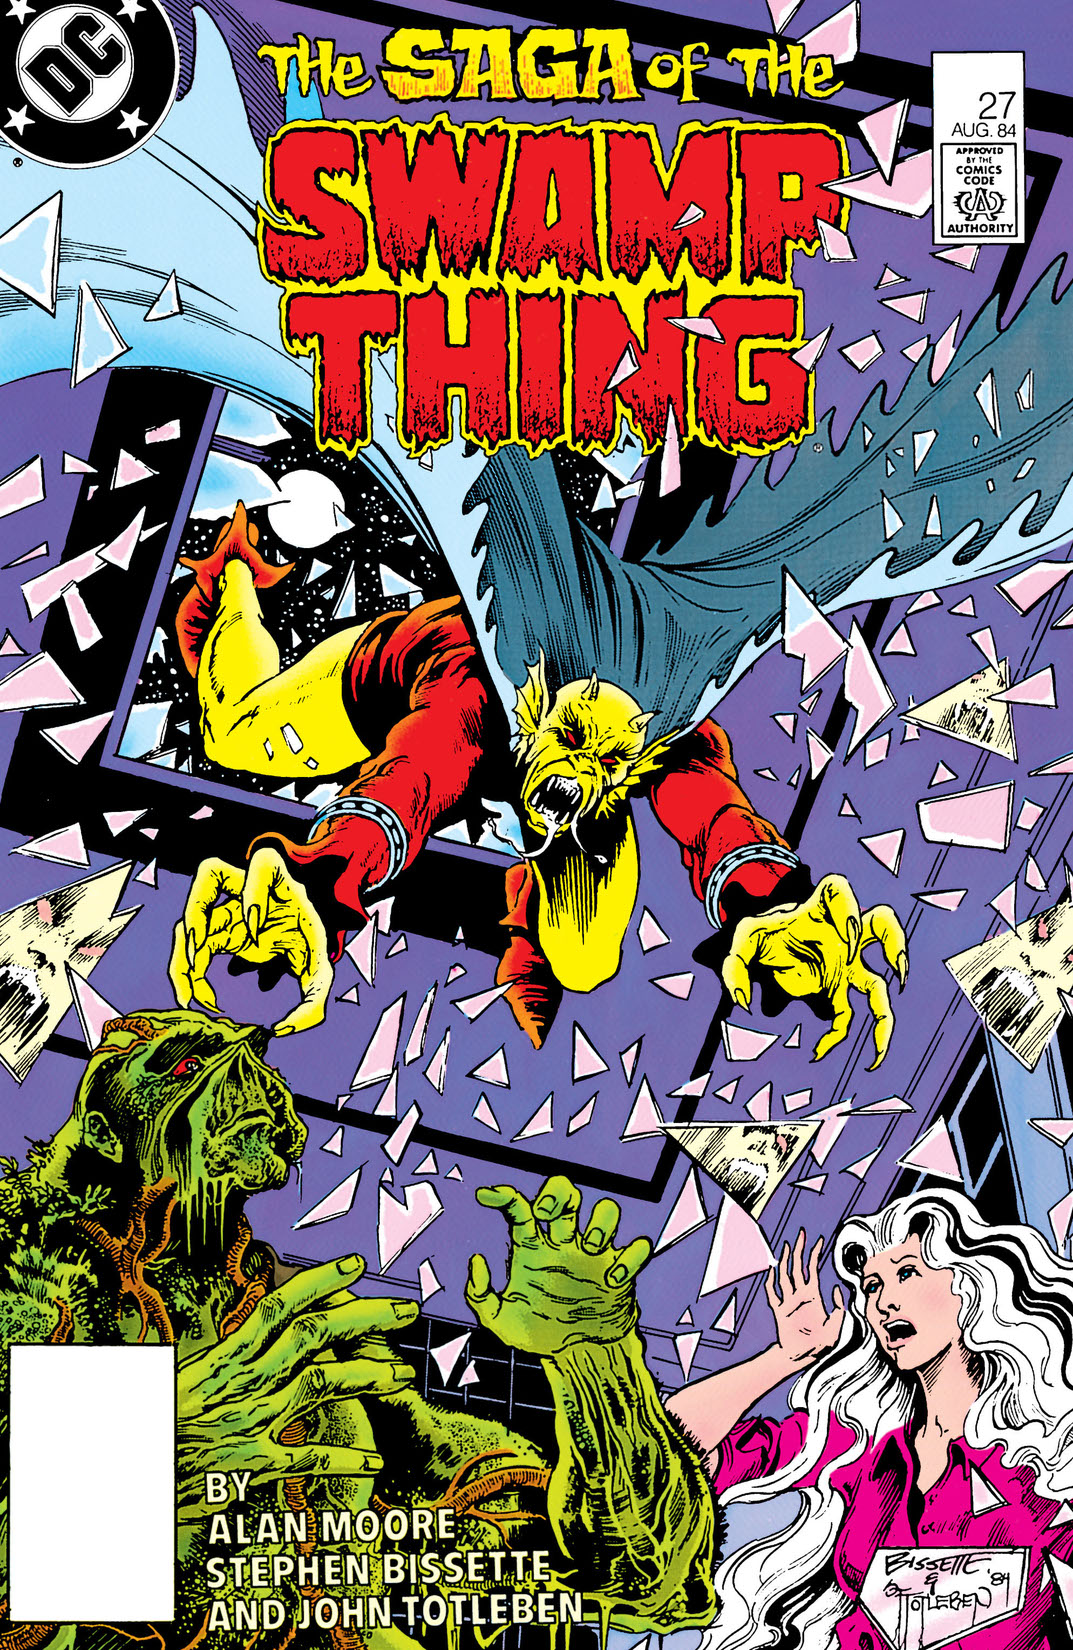 The Saga of the Swamp Thing (1982-) #27 preview images